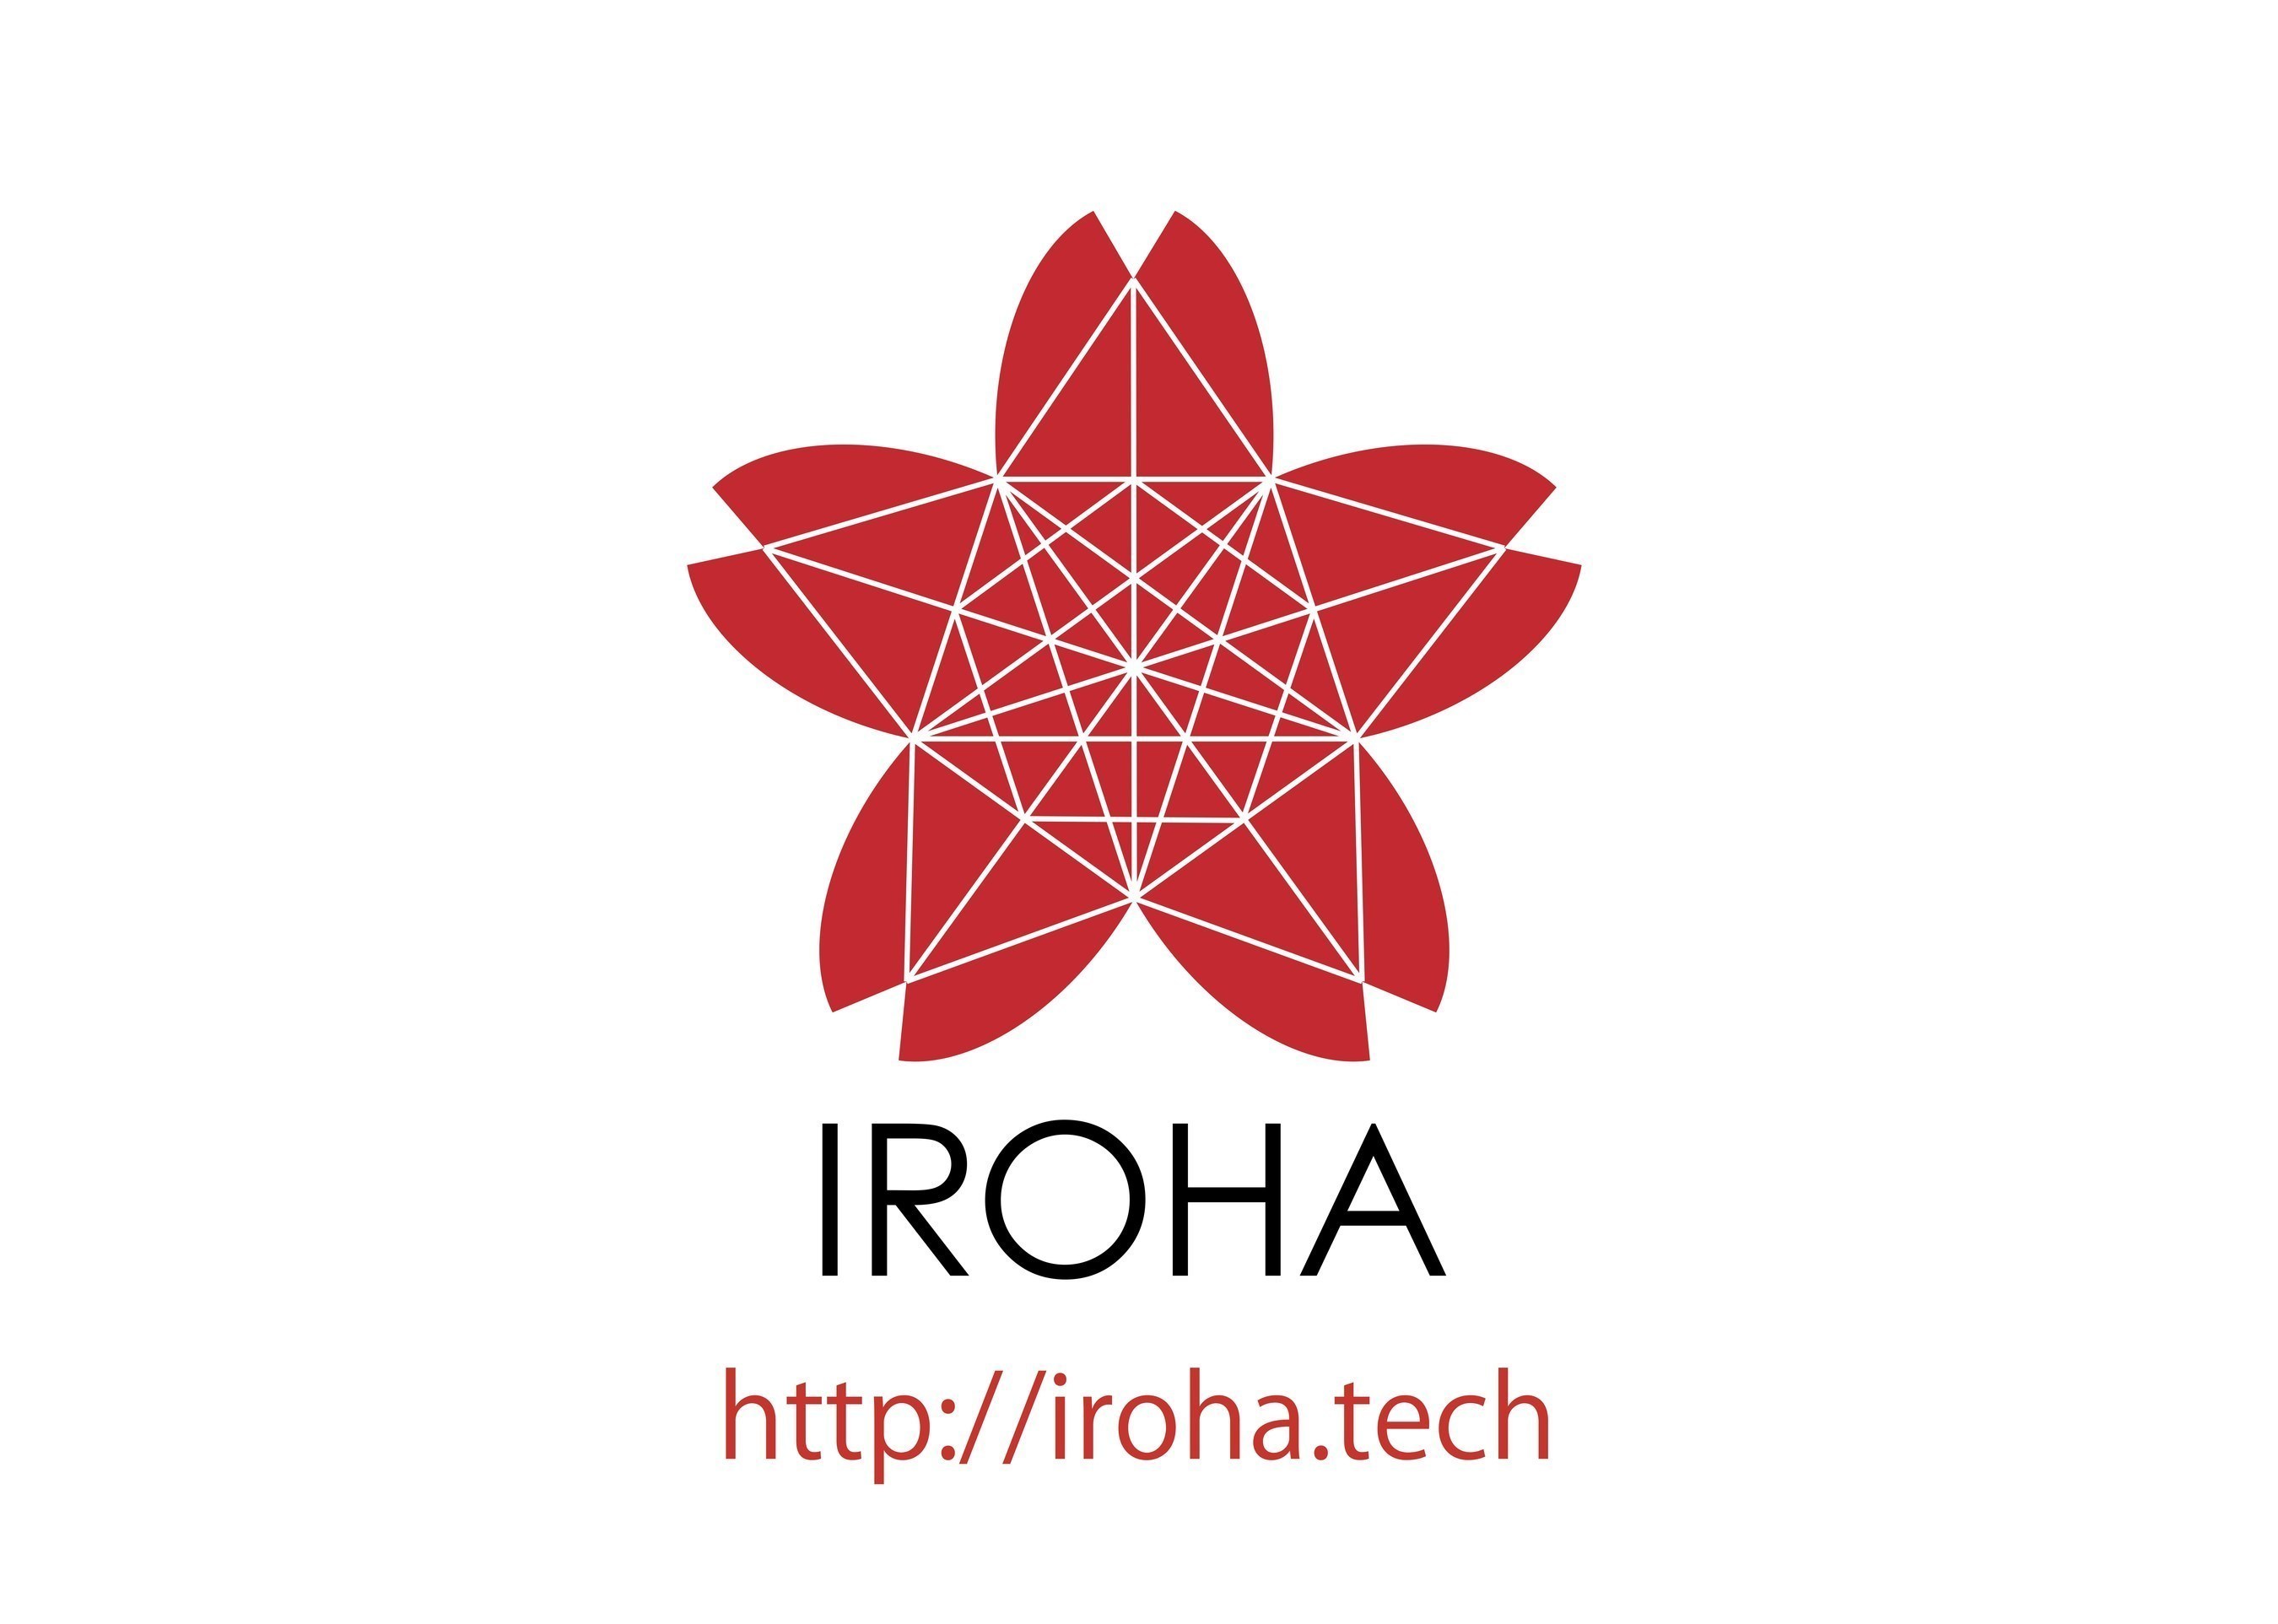 Soramitsu announces "Iroha," a Proposal to the Linux Foundation's Hyperledger Project